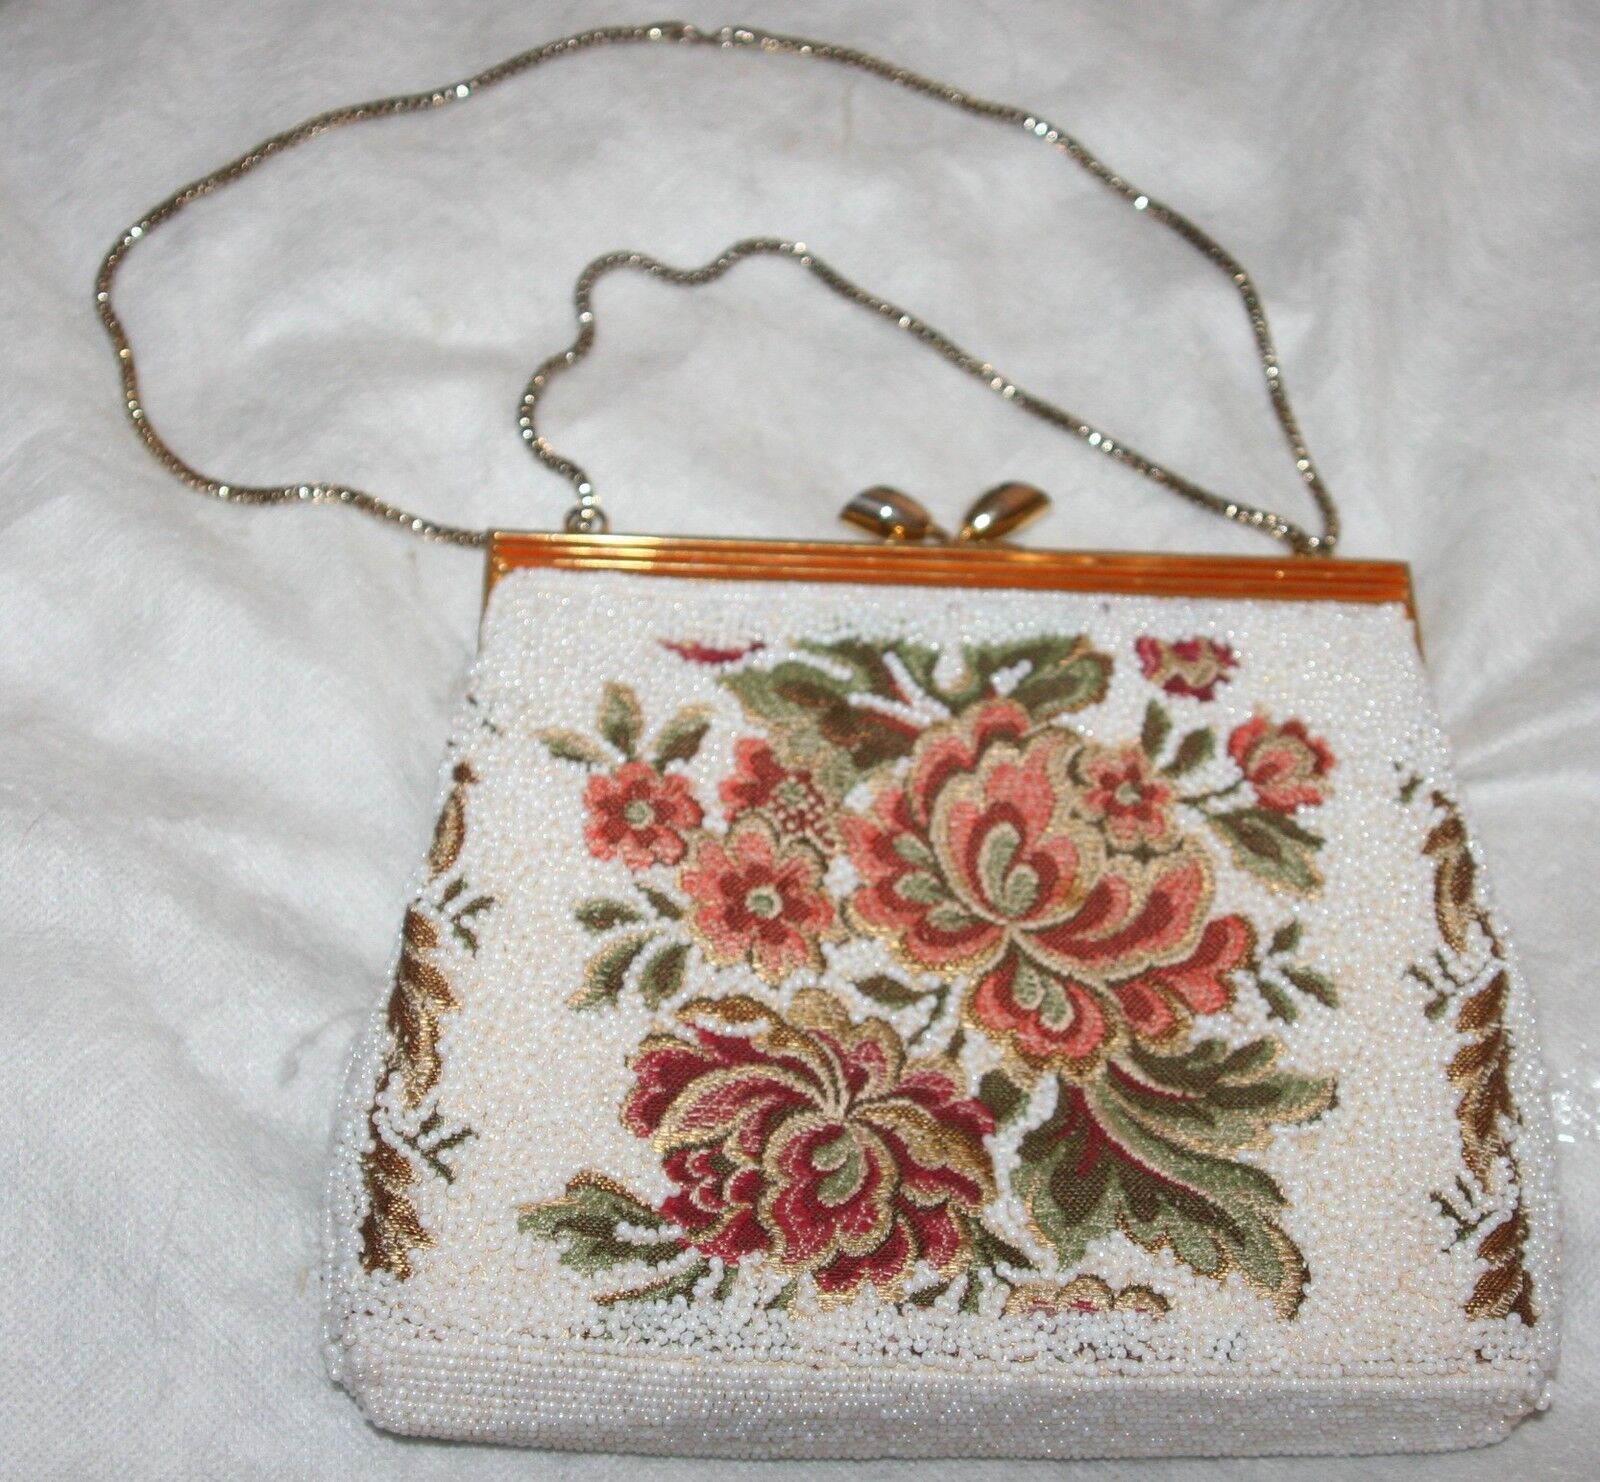 GORGEOUS TRUE VINTAGE Evening Bag - White Beads over Tapestry Fabric 